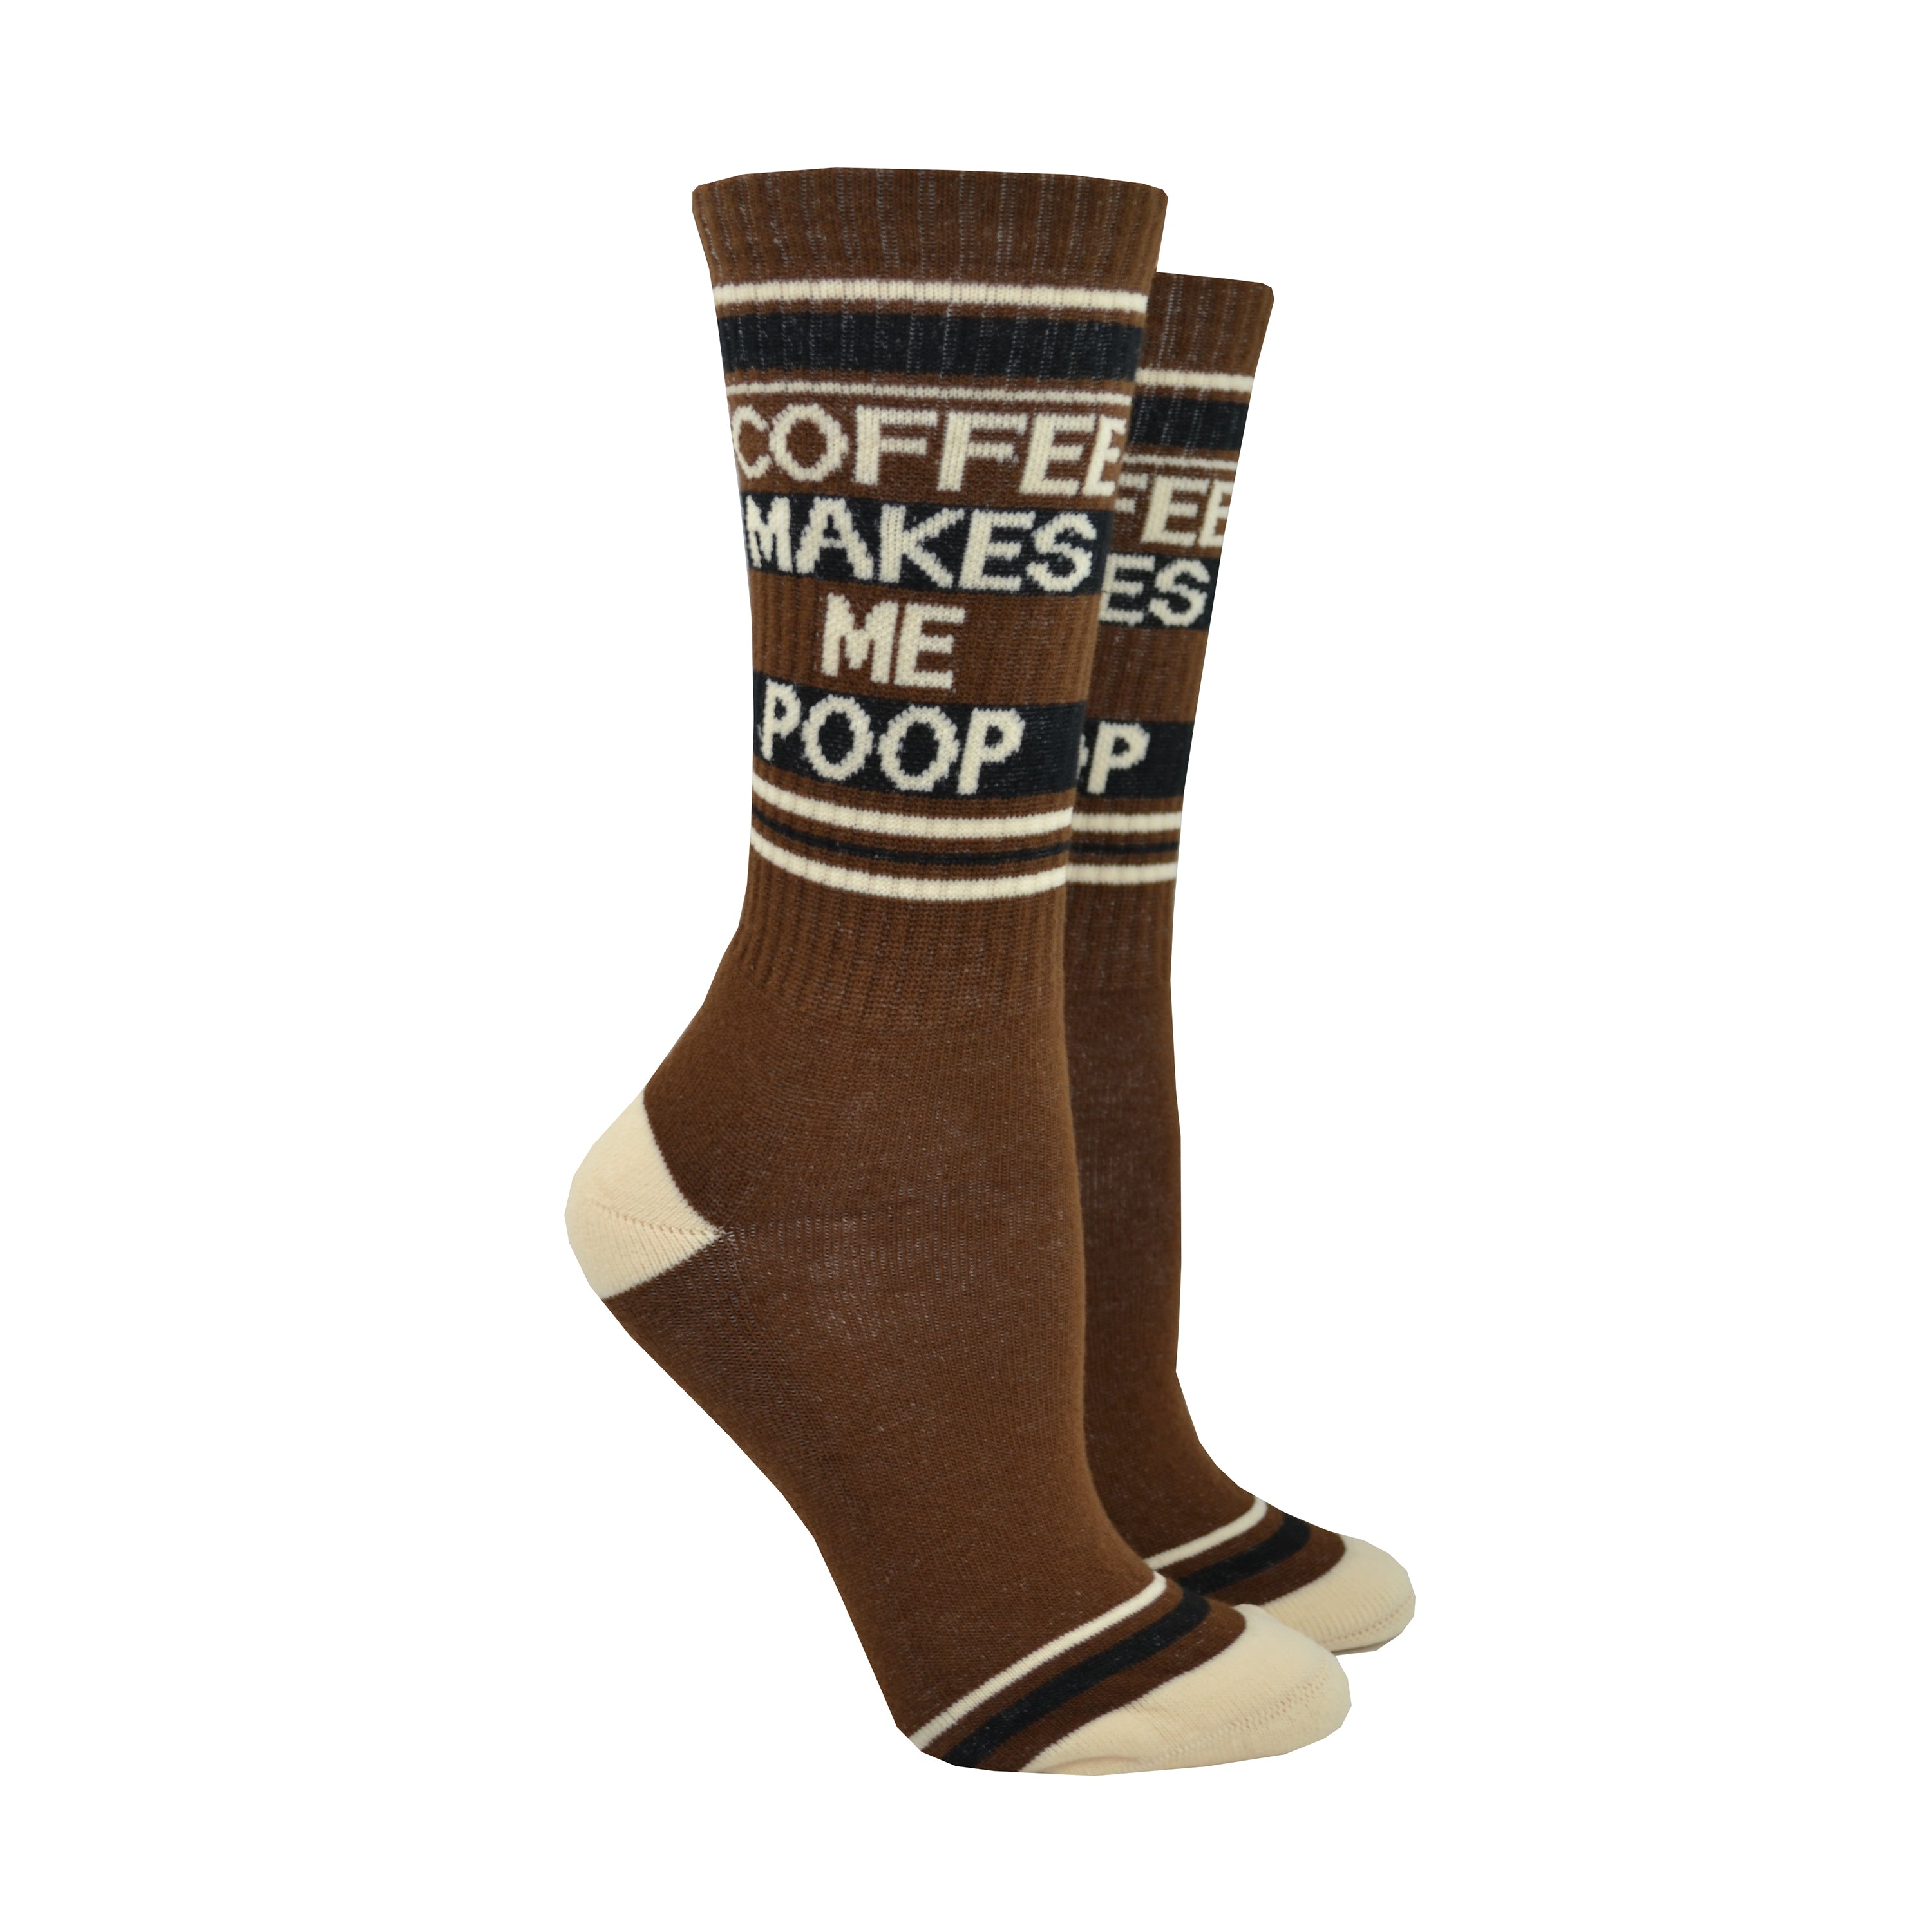 Shown on a foot mold, a pair of Gumball Poodle, dark brown cotton crew socks with tan heel/toe/accent stripes and “Coffee Makes Me Poop” text